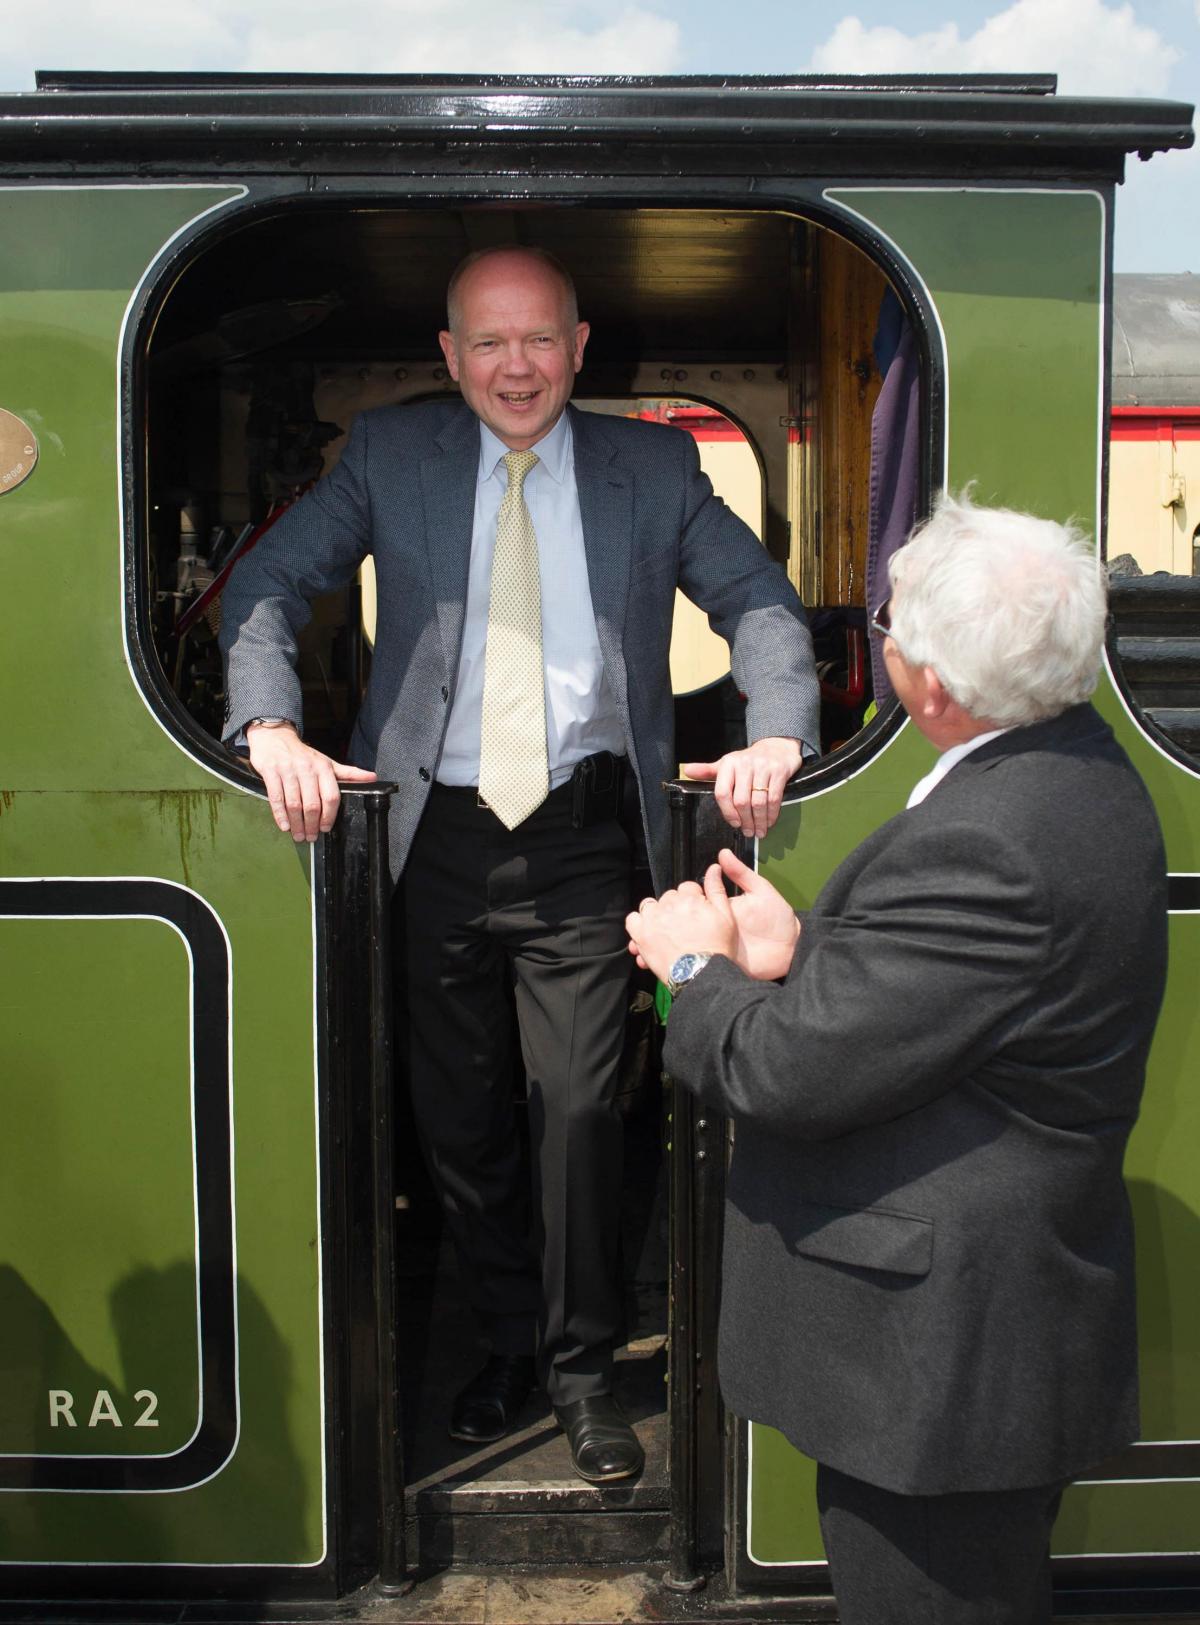 Foreign Secretary William Hague looks out from the footplate of a steam train as he visits Wensleydale Railway at Leeming Bar station as part of the events held to mark the line's tenth anniversary in 2013